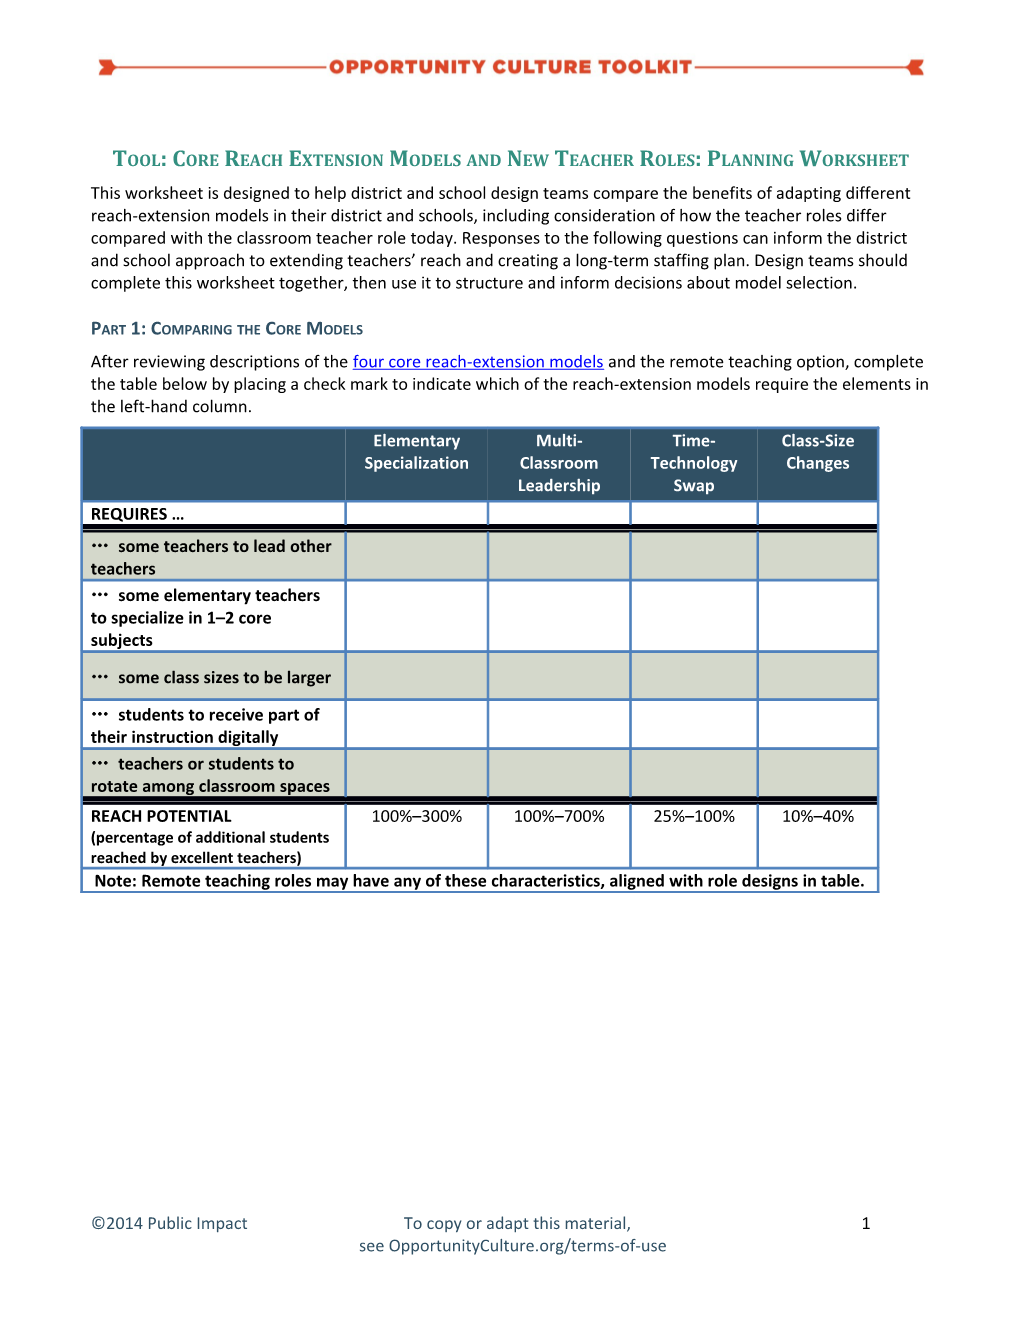 Tool: Core Reach Extension Models and New Teacher Roles: Planning Worksheet